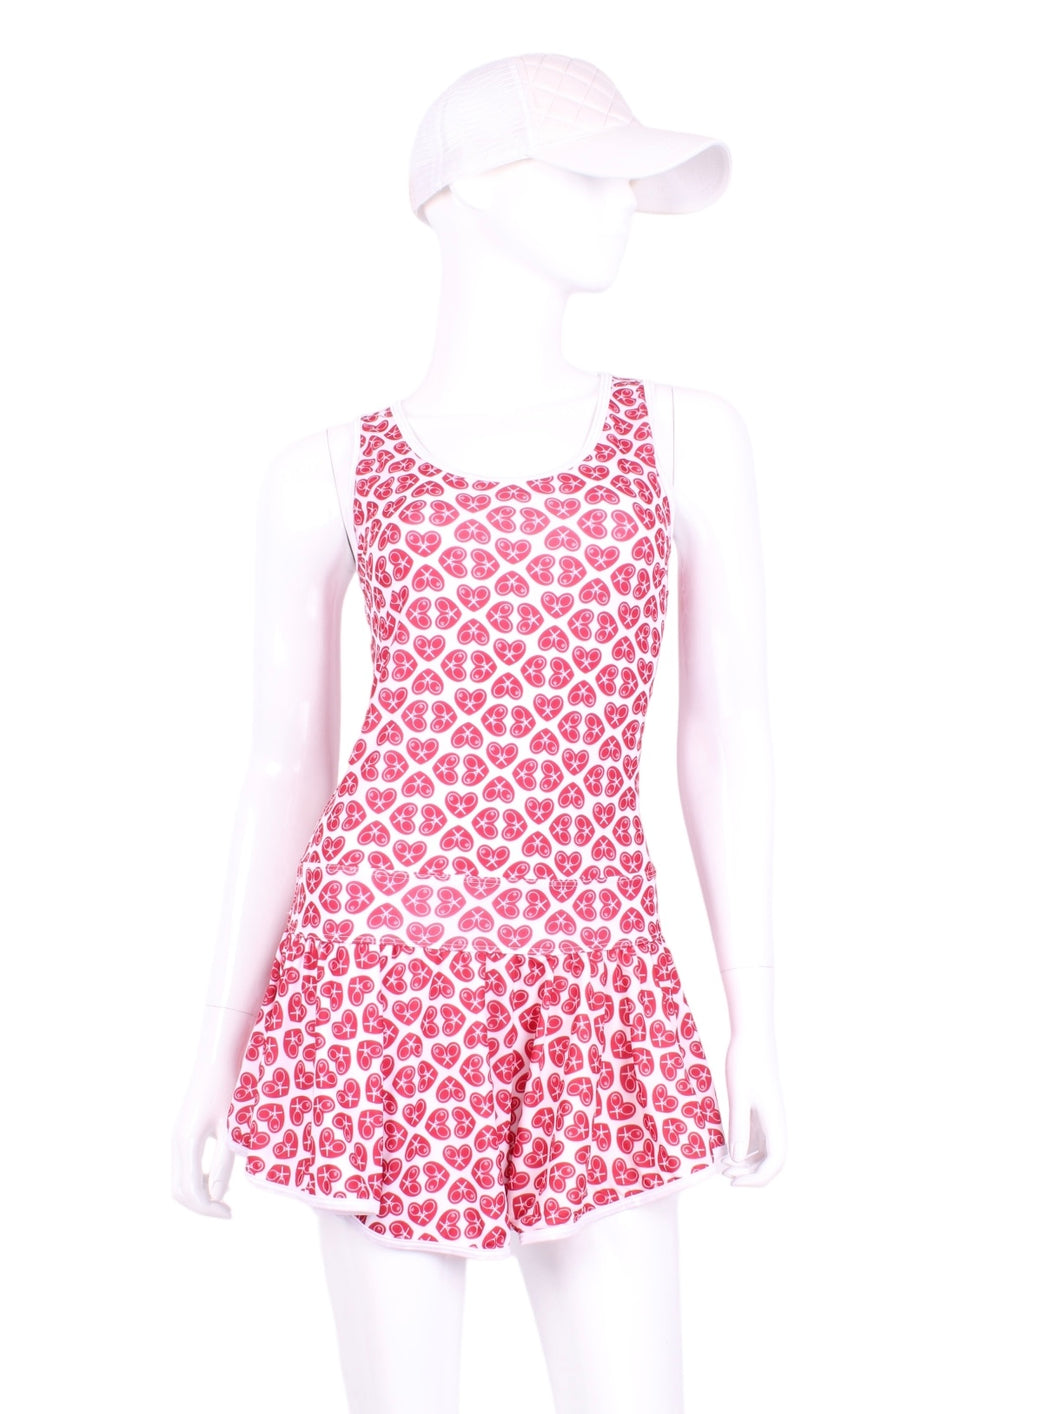 Super fun tiny heart print on this one!  Let the Love Love flow! The Sandra Mee Dress offers a playful, fun, and very flirty look. Our dress is fitted, and flares out at the skirt with cute cut out ''O'' in the back. It is perfect for tennis, running and golf (with our Leg Lengthening Leggings), and of course, a trip to your after-court party with your friends. It was designed for confident women like you!